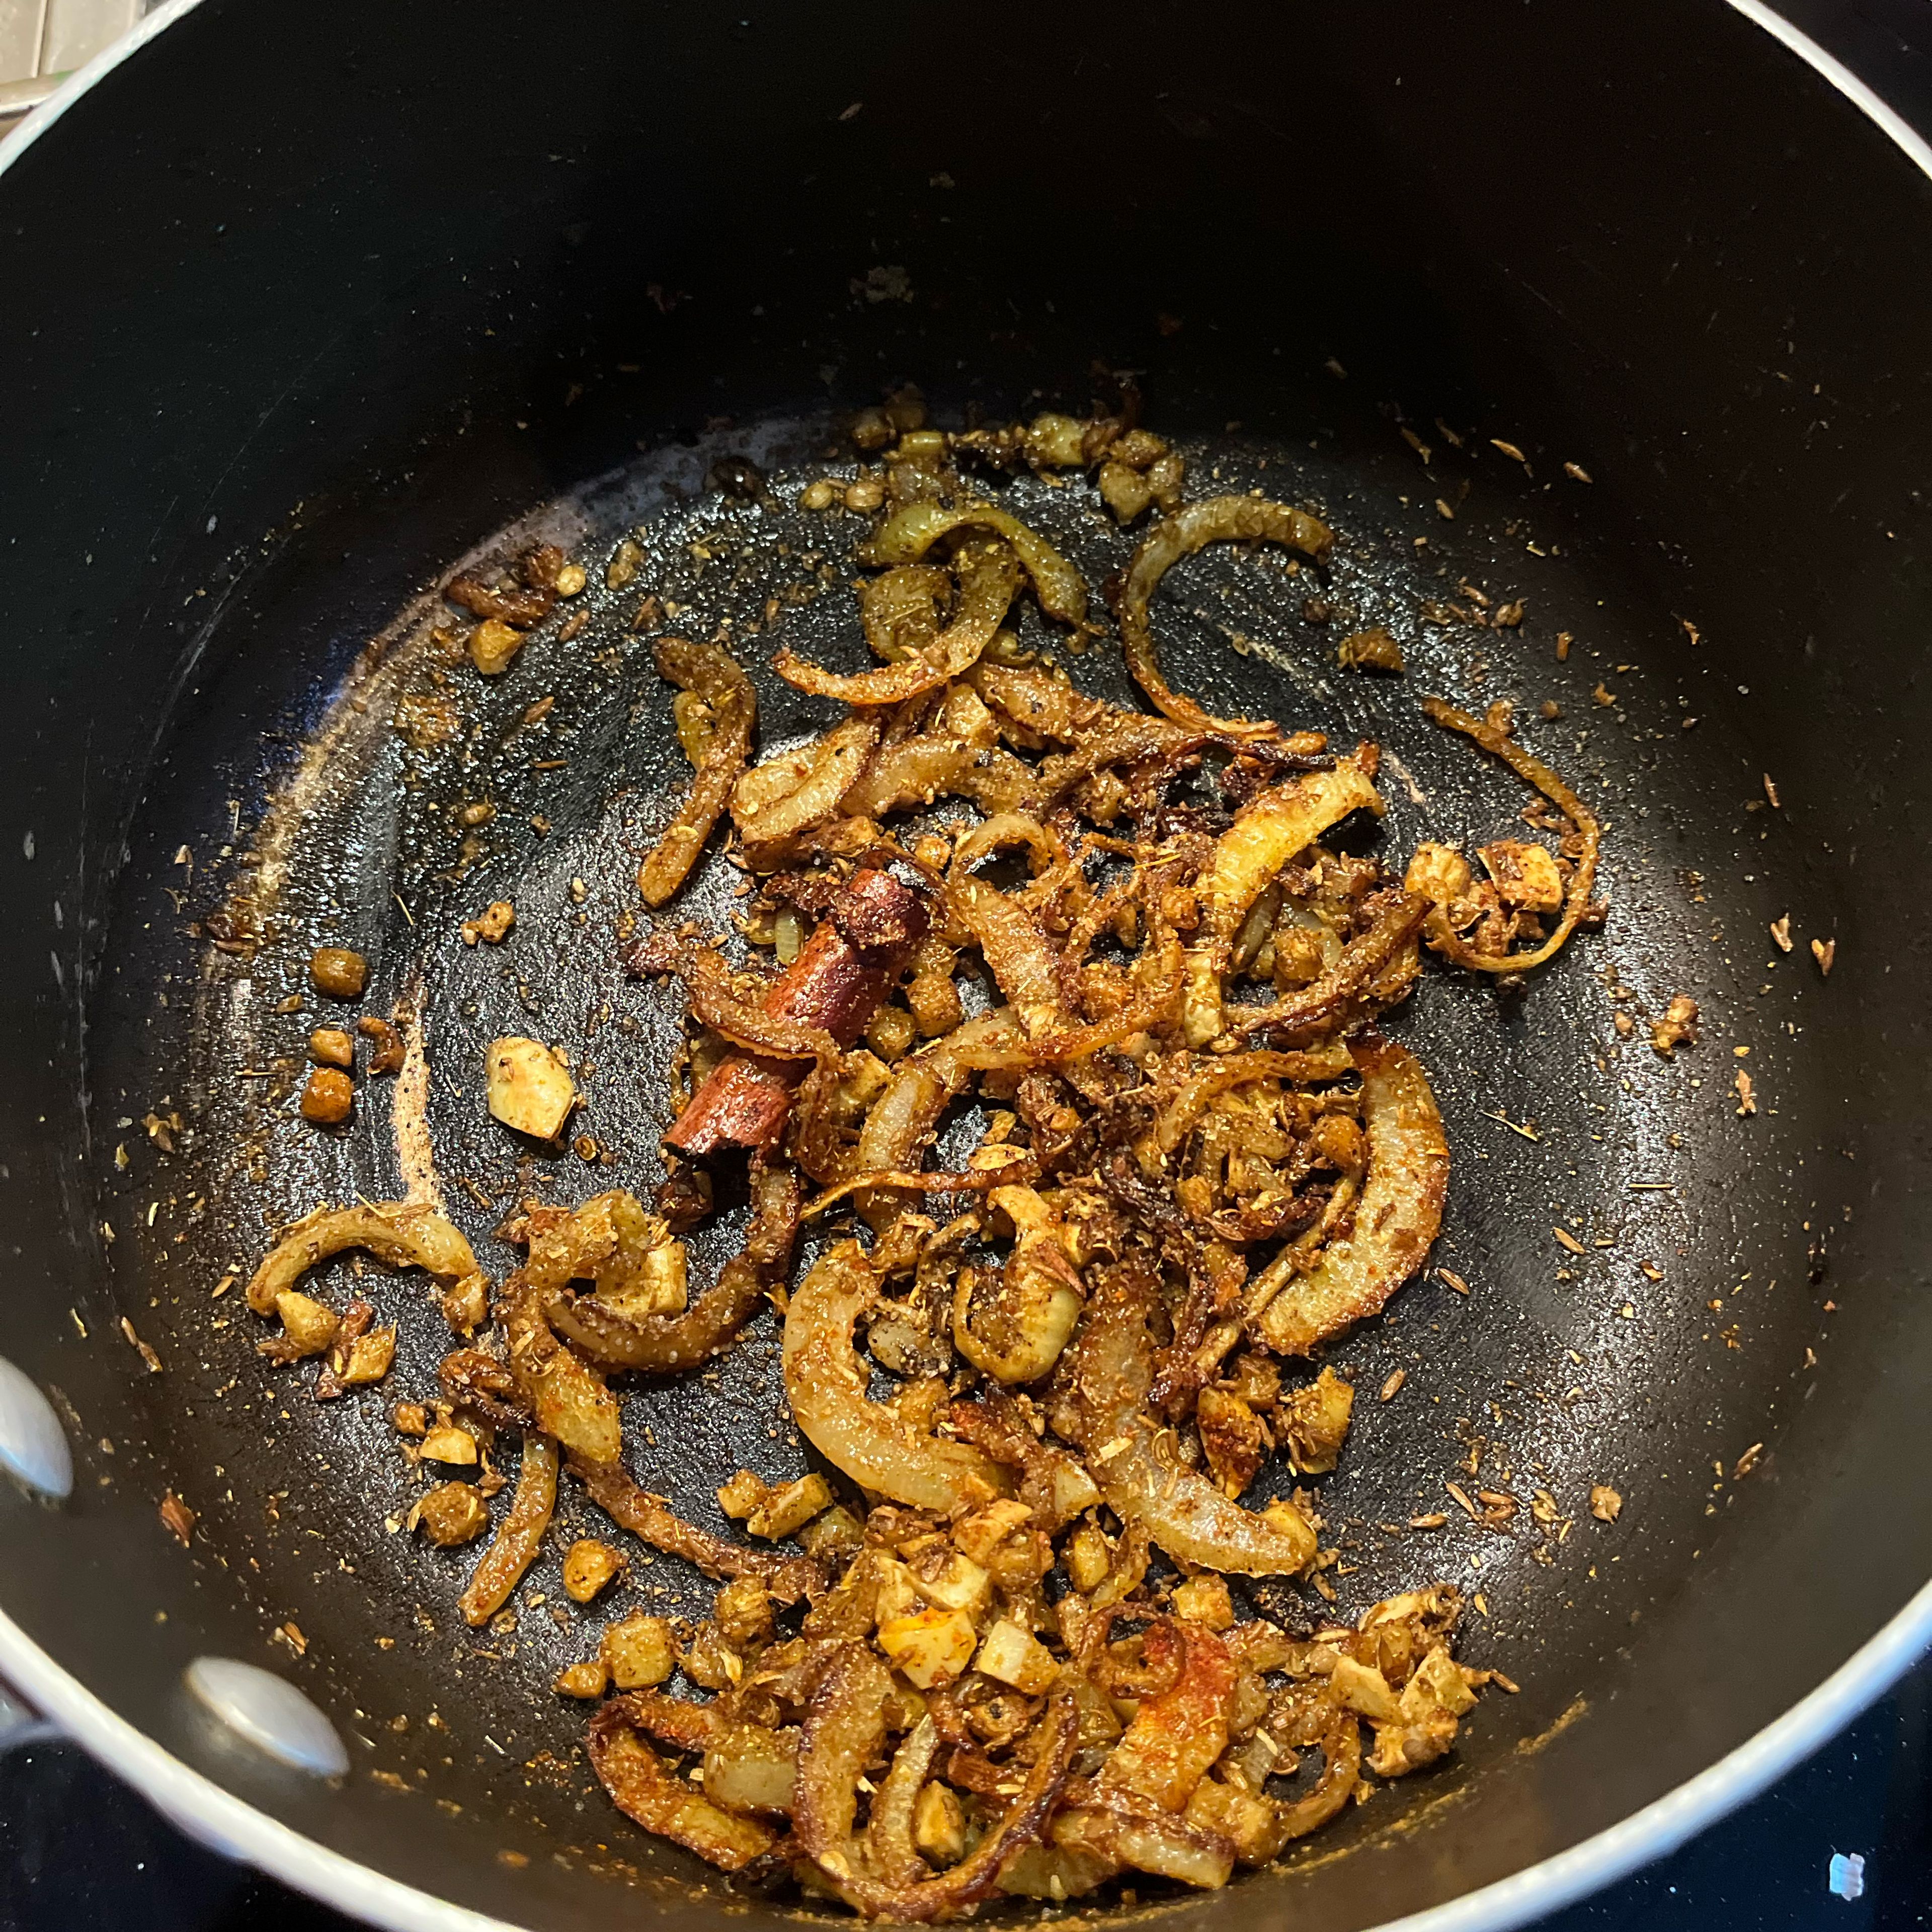 Turn down heat to medium, add ginger and garlic and fry until fragrant, then add spices and stir.